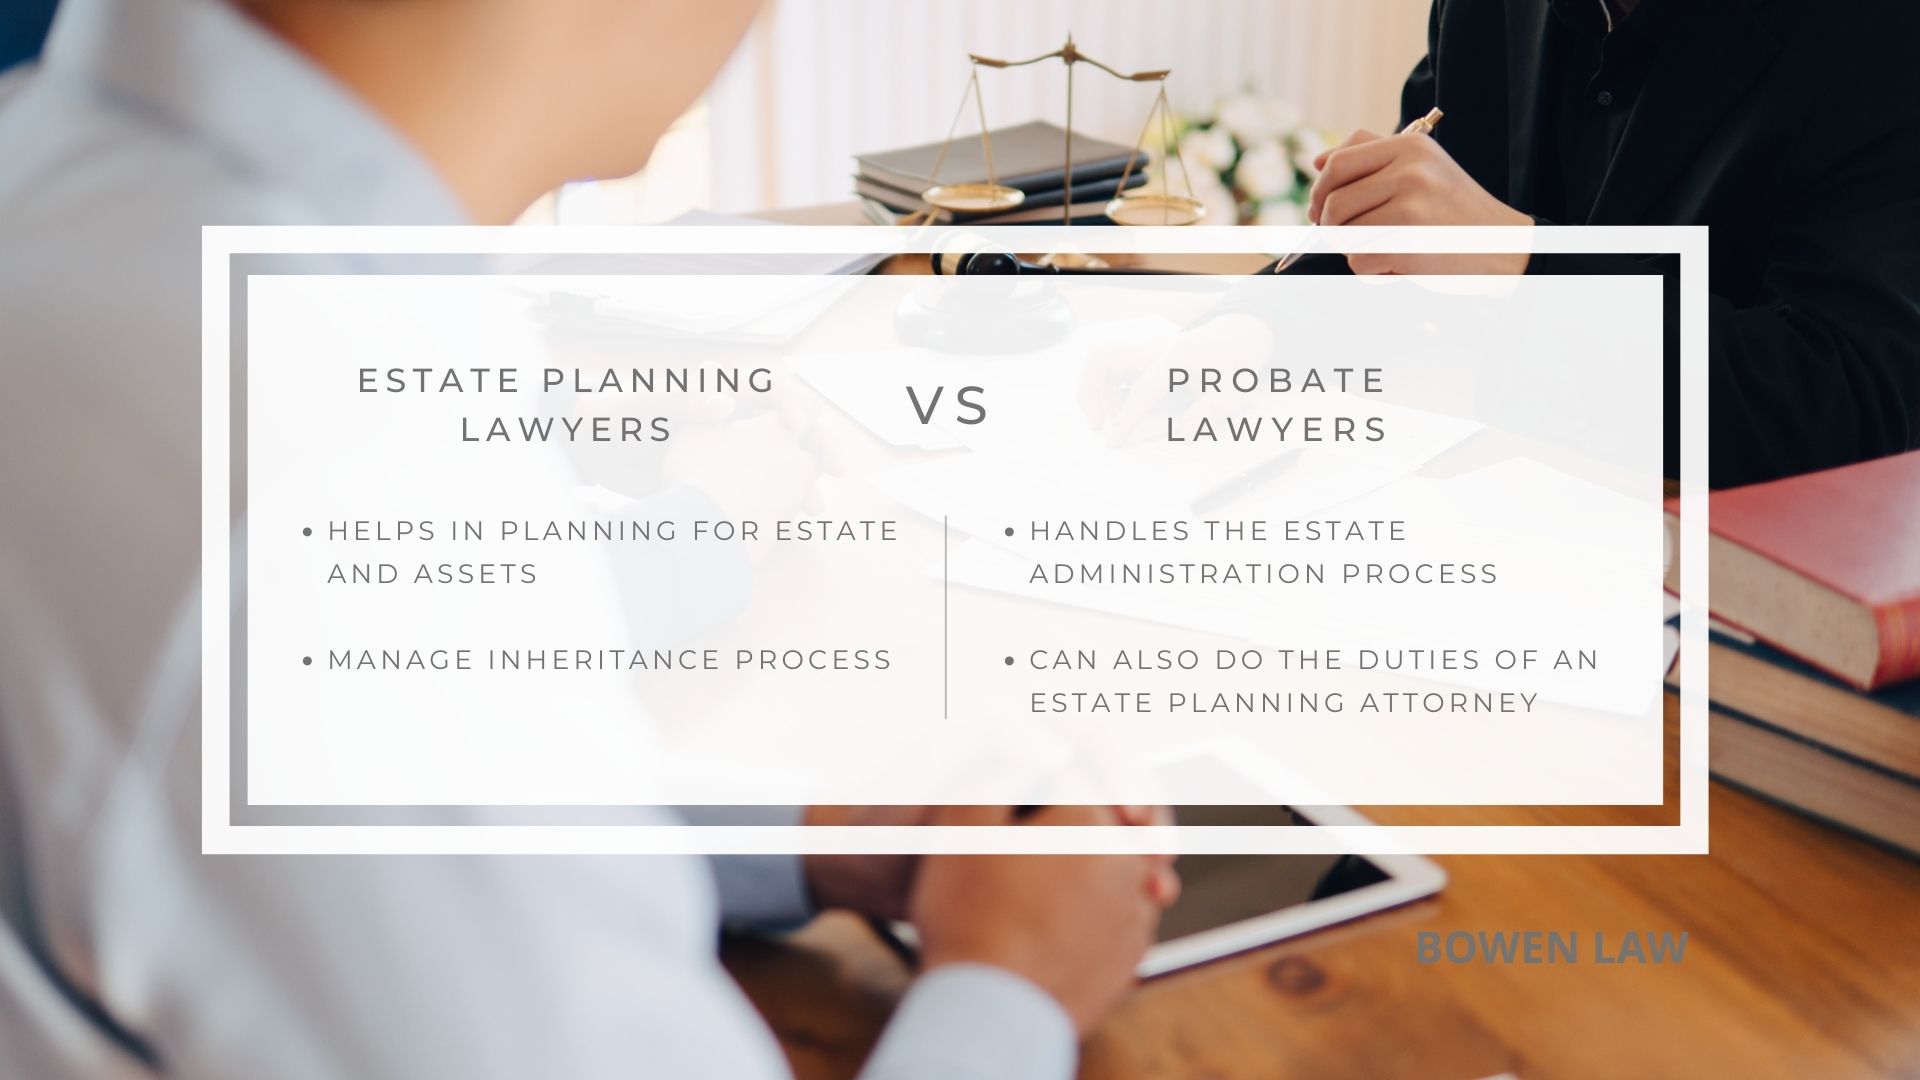 Infographic image of estate planning lawyers vs probate lawyers